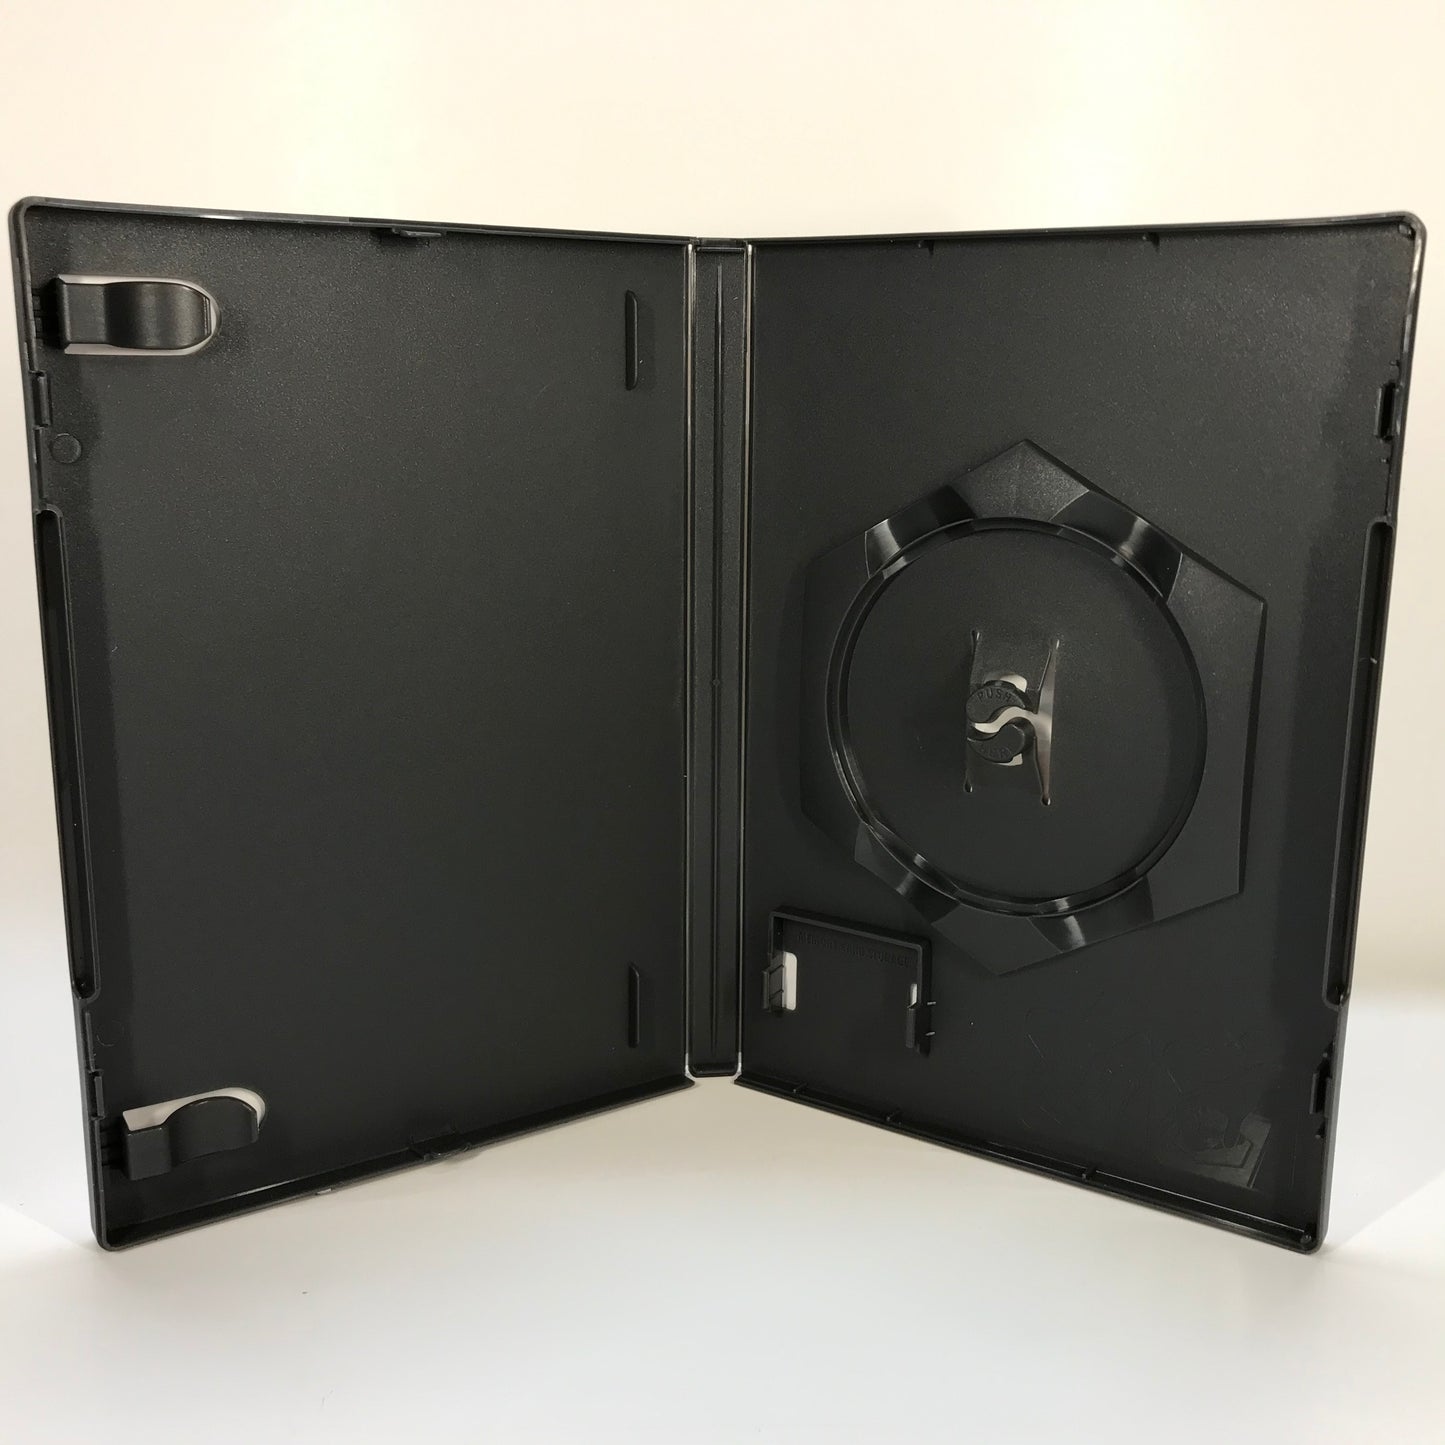 GameCube Replacement Case - NO GAME - Preview Disc